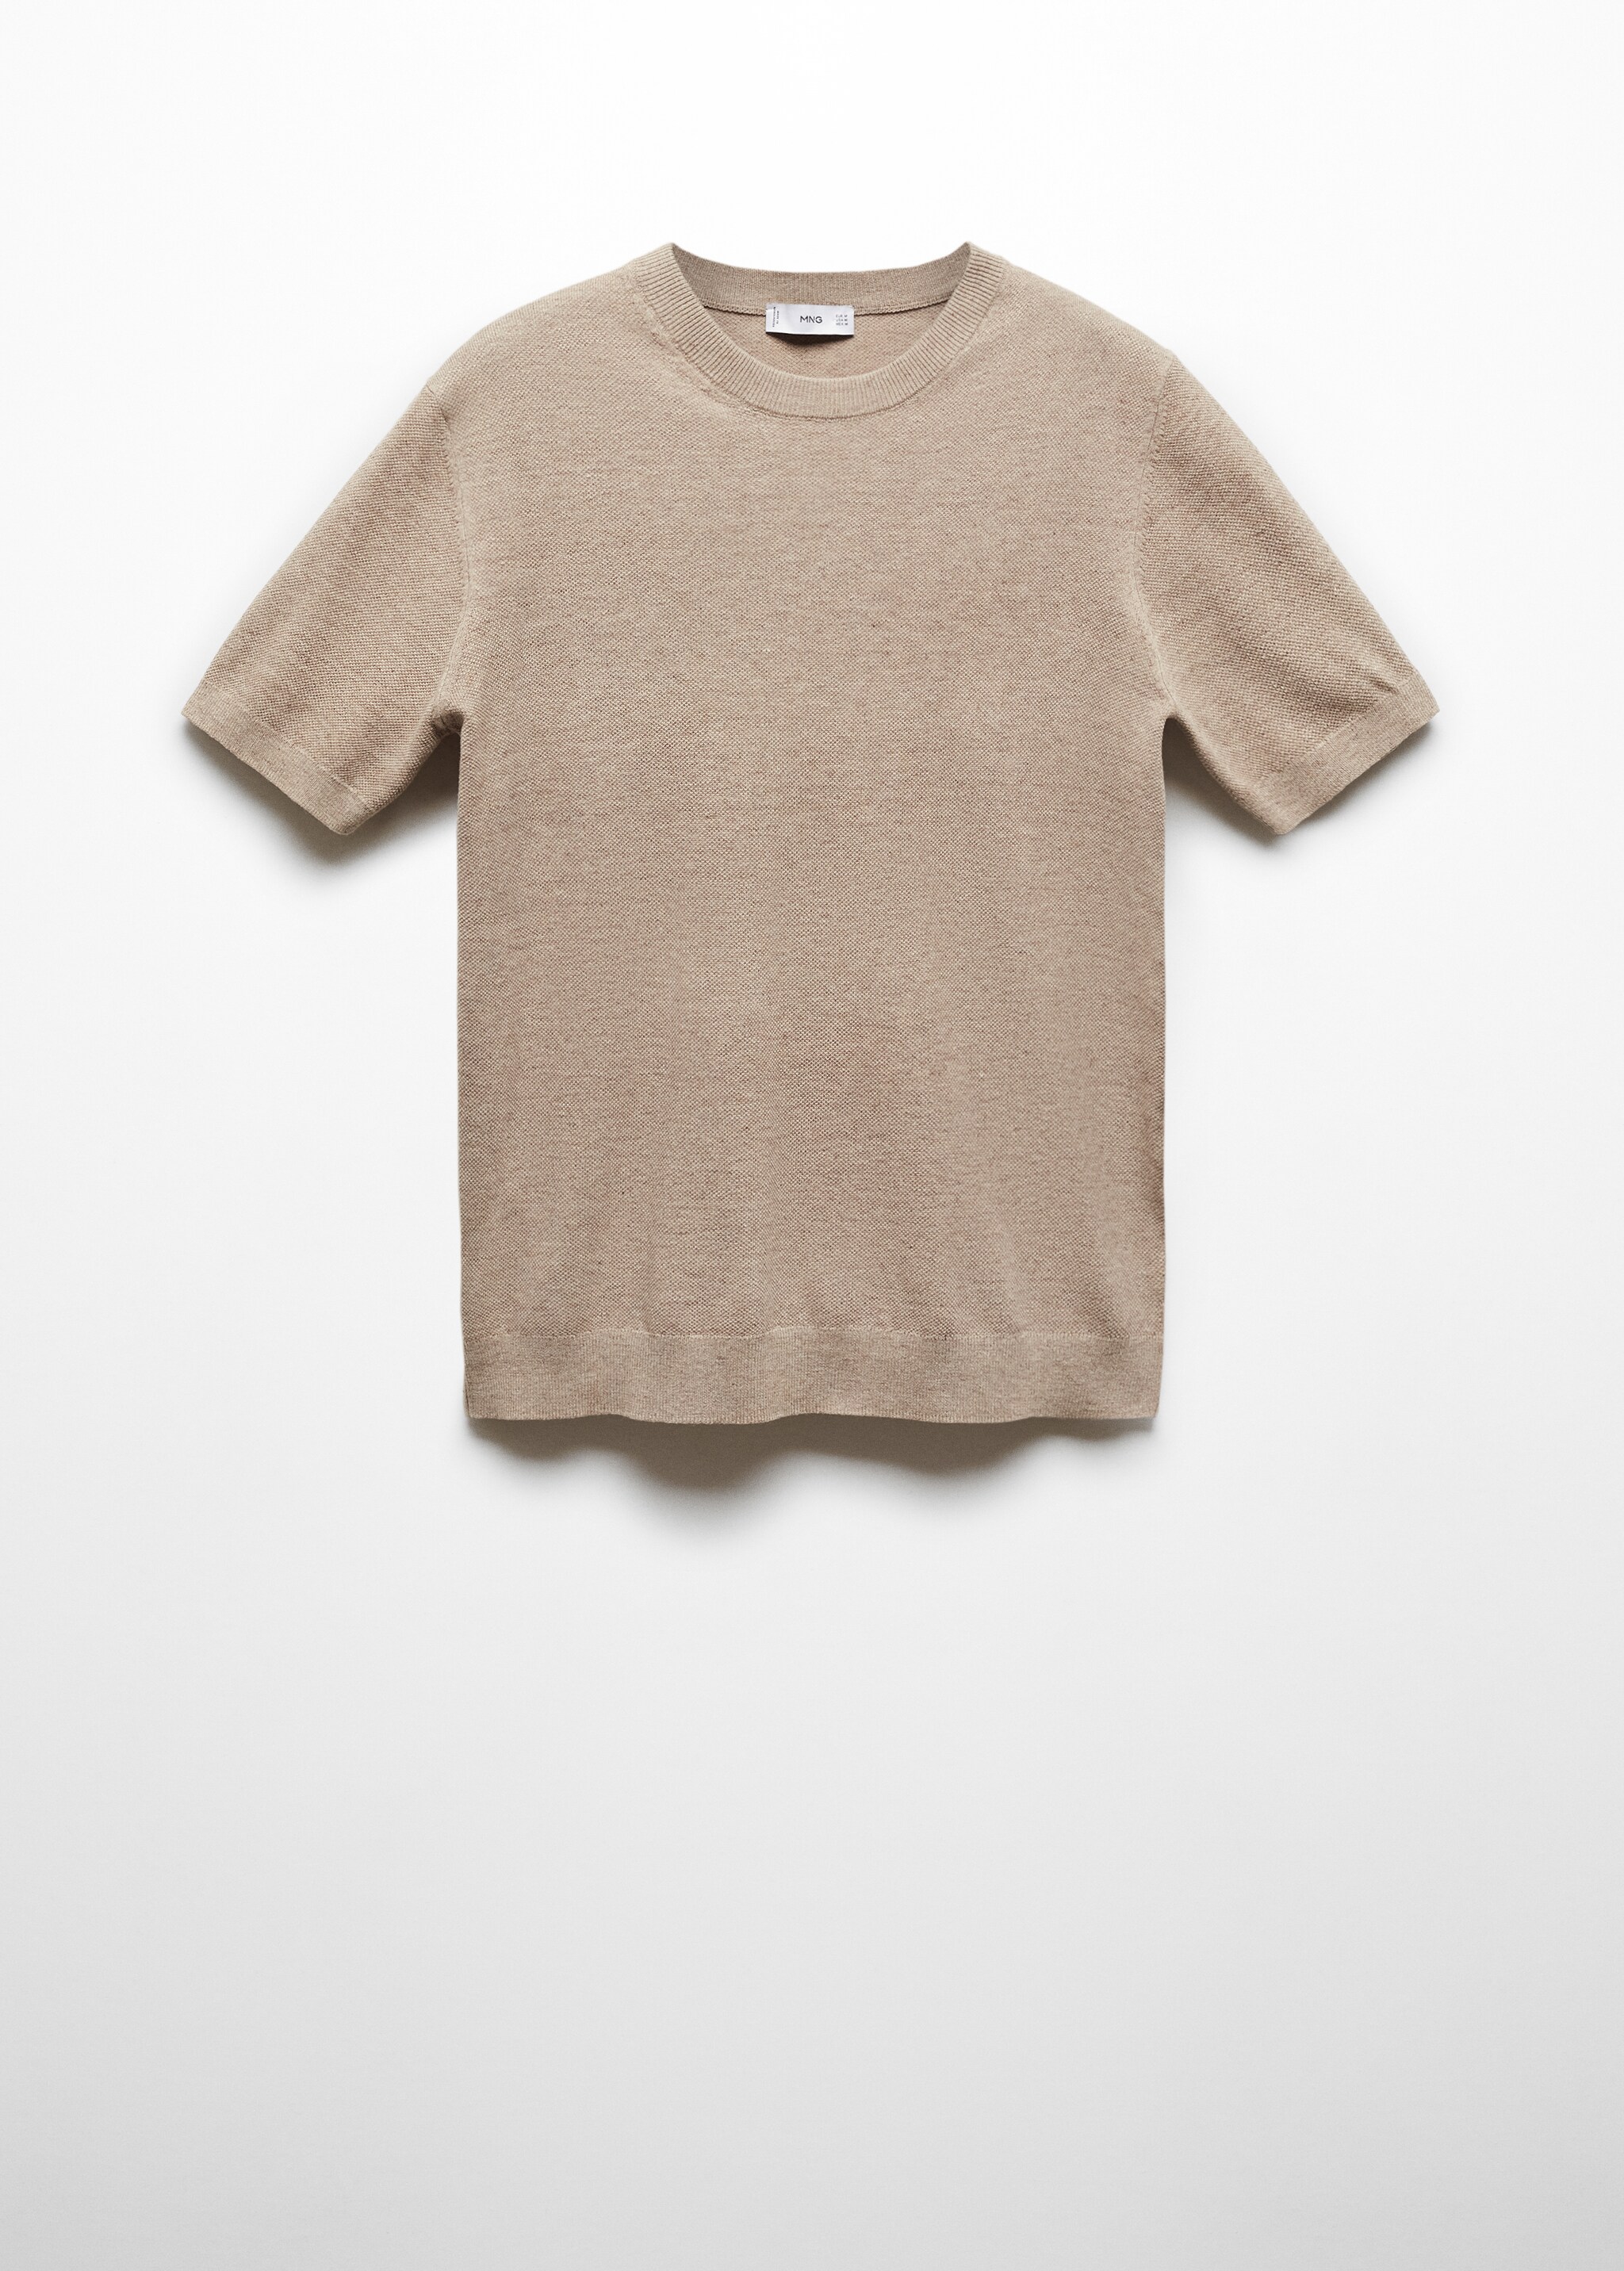 Structured cotton knit t-shirt - Article without model